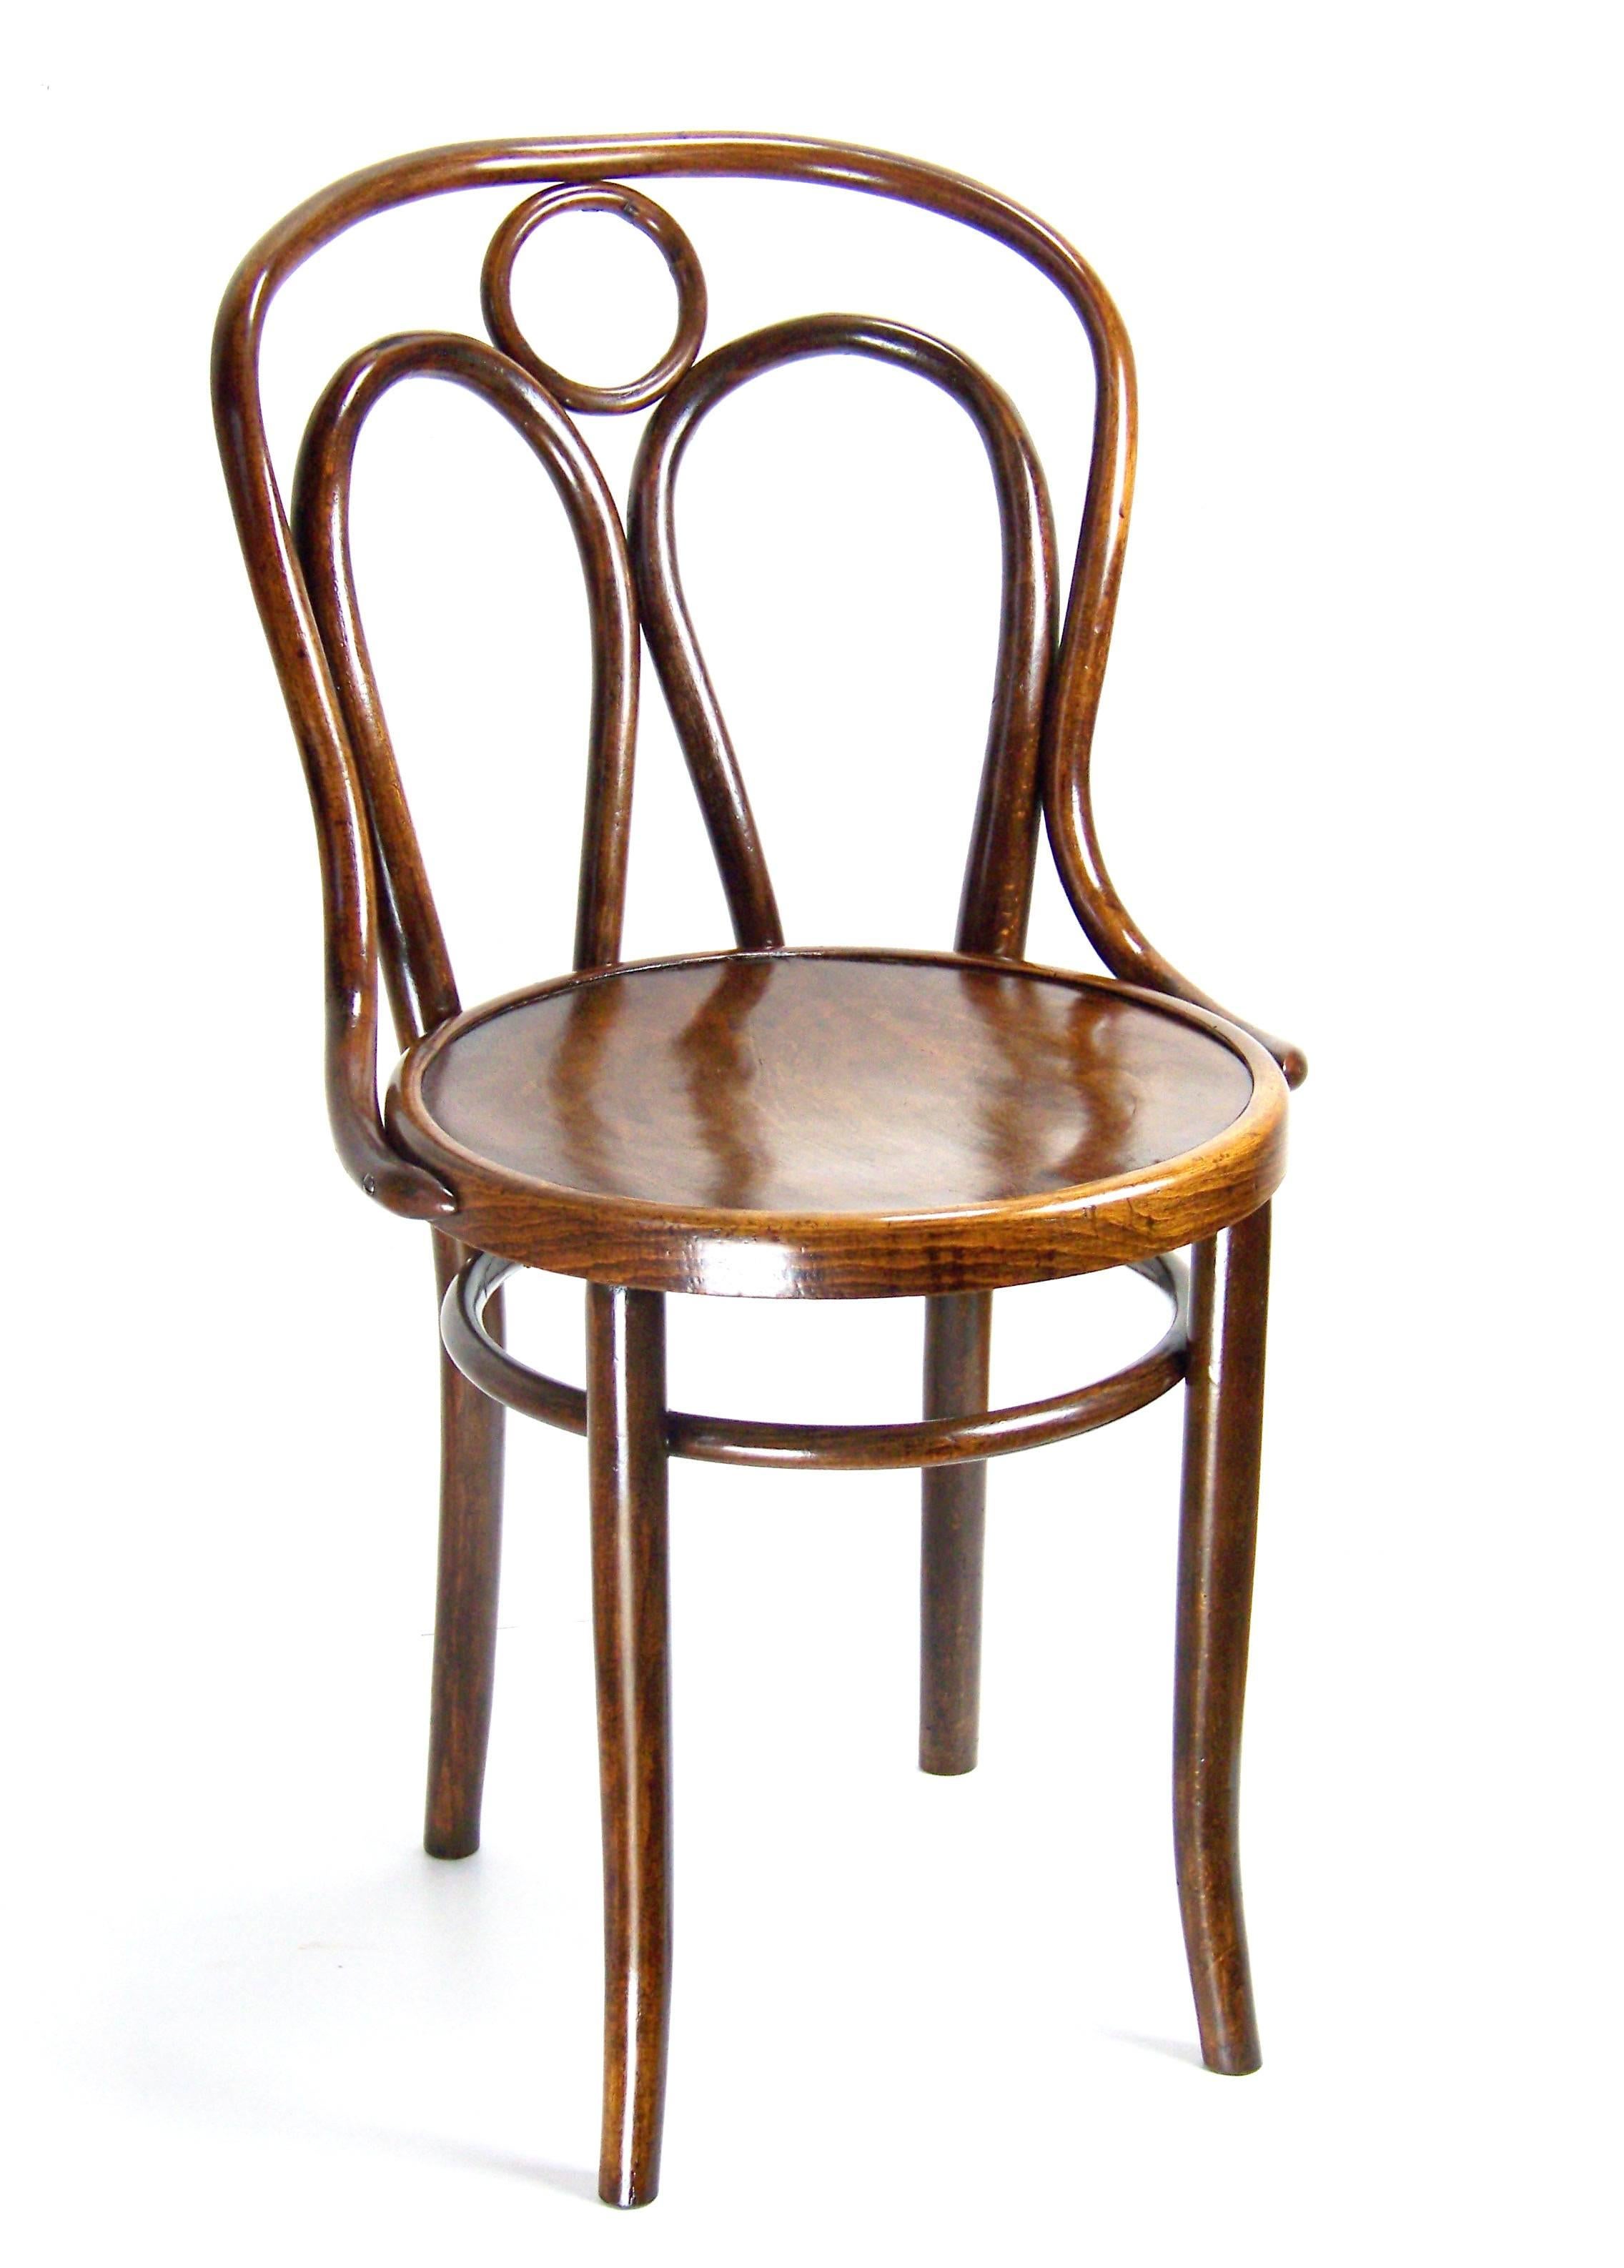 Manufactured in Austria by the Jacob & Josef Kohn company, circa 1900. Bent beechwood. Original condition with minor signs of use. Chair was cleaned and gentle re-polished with shellack finish. Tinny traces of woodworm (already inactive). Repaired